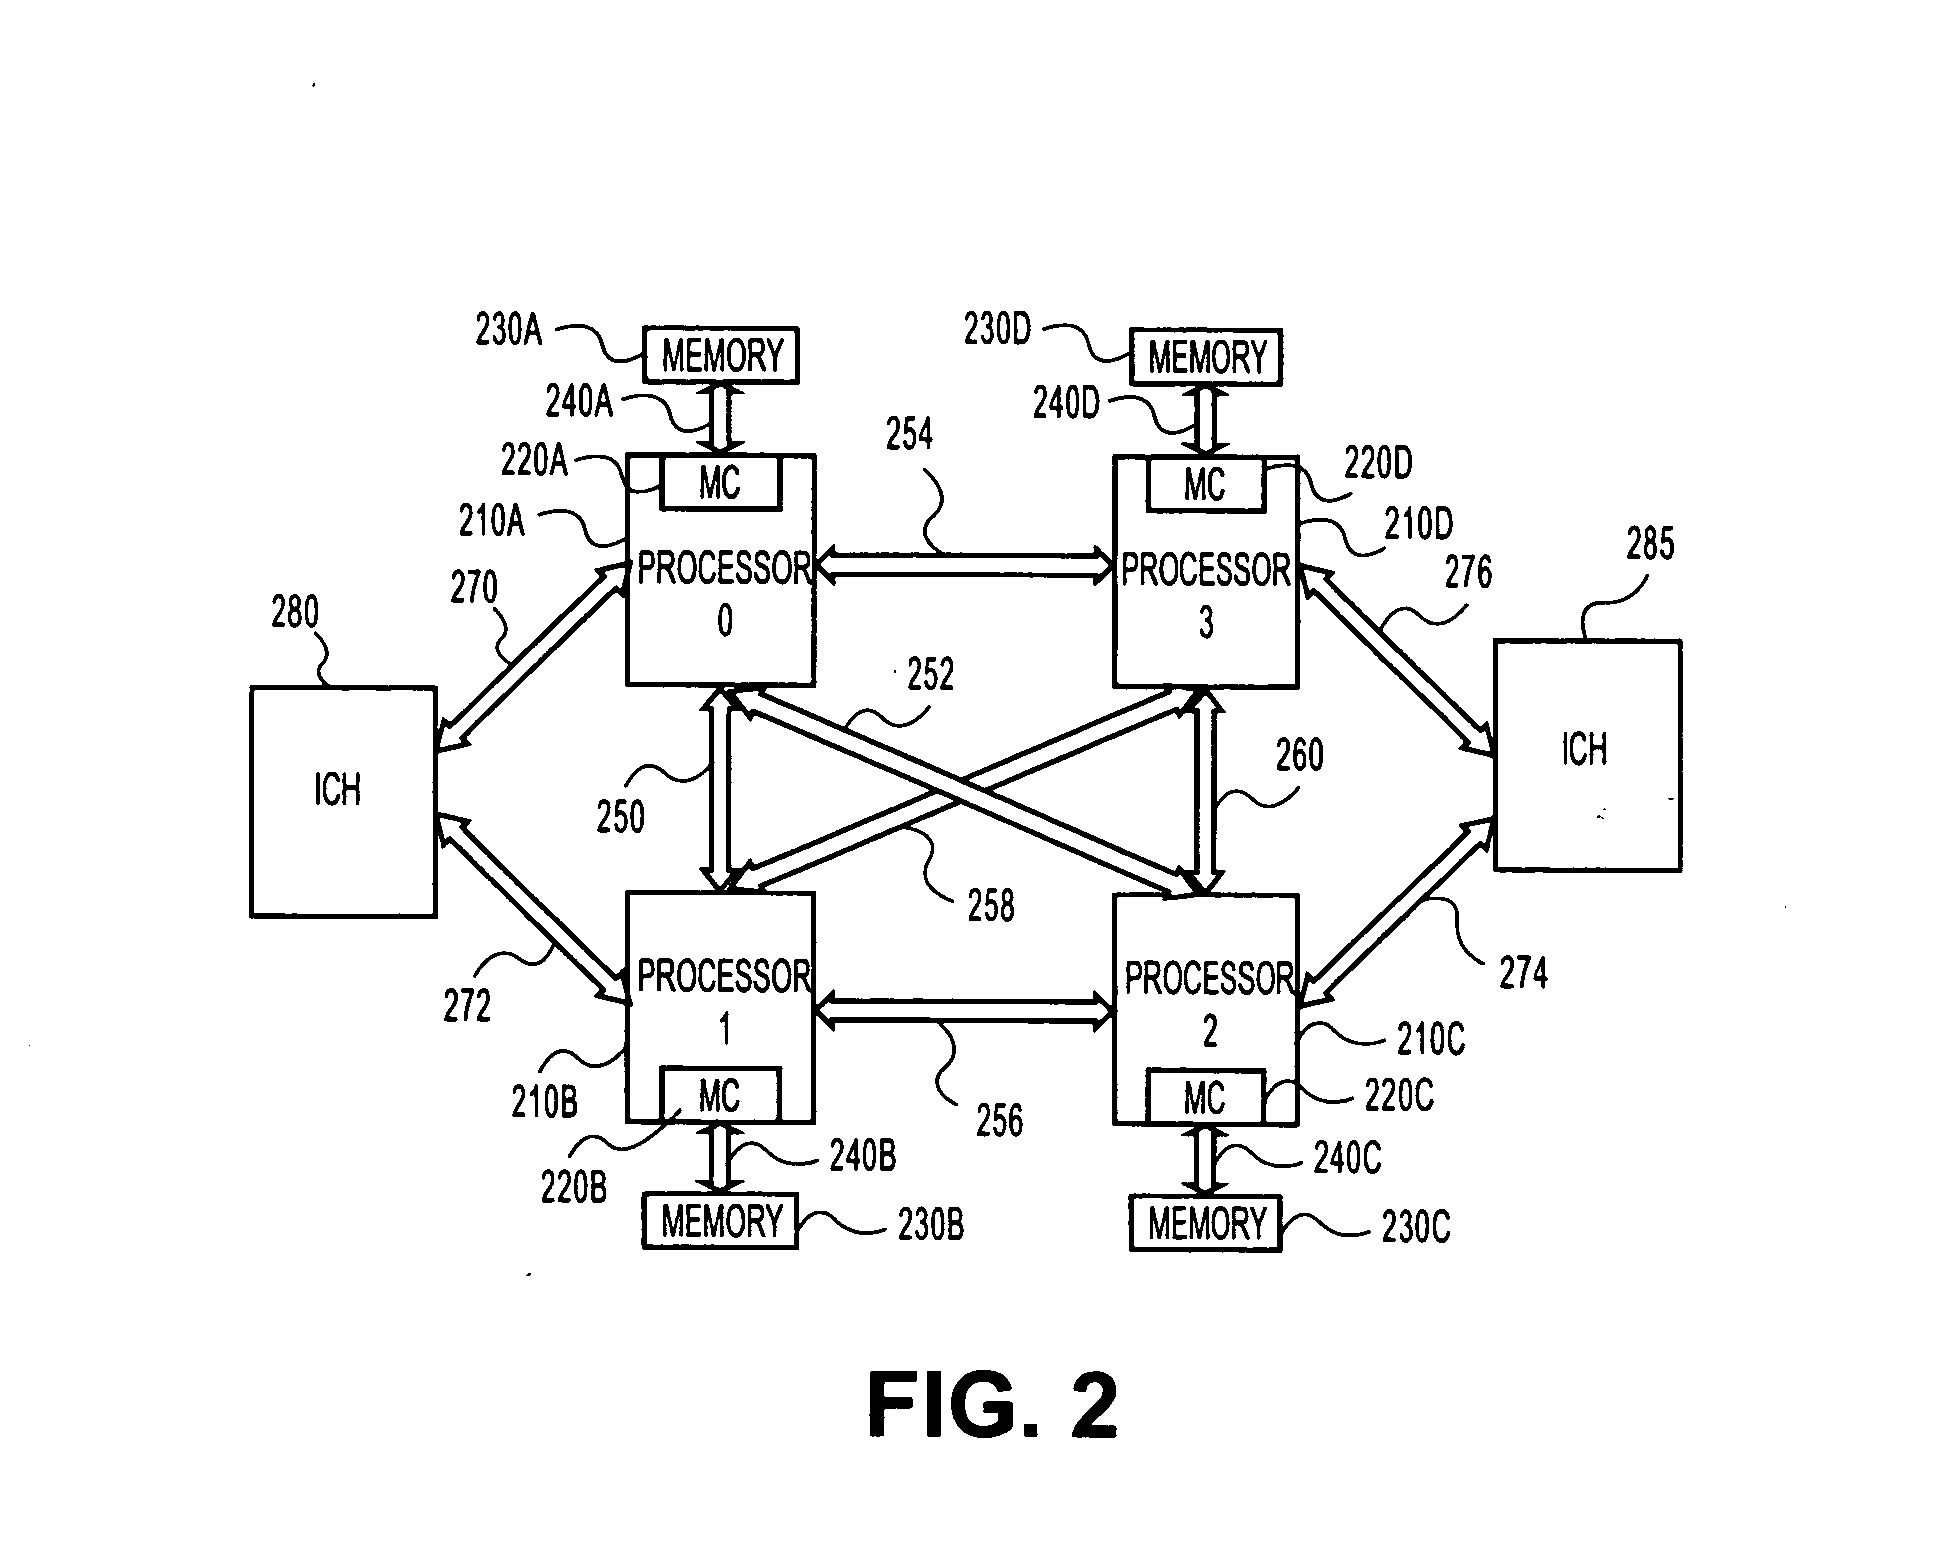 Method and apparatus to dynamically adjust resource power usage in a distributed system